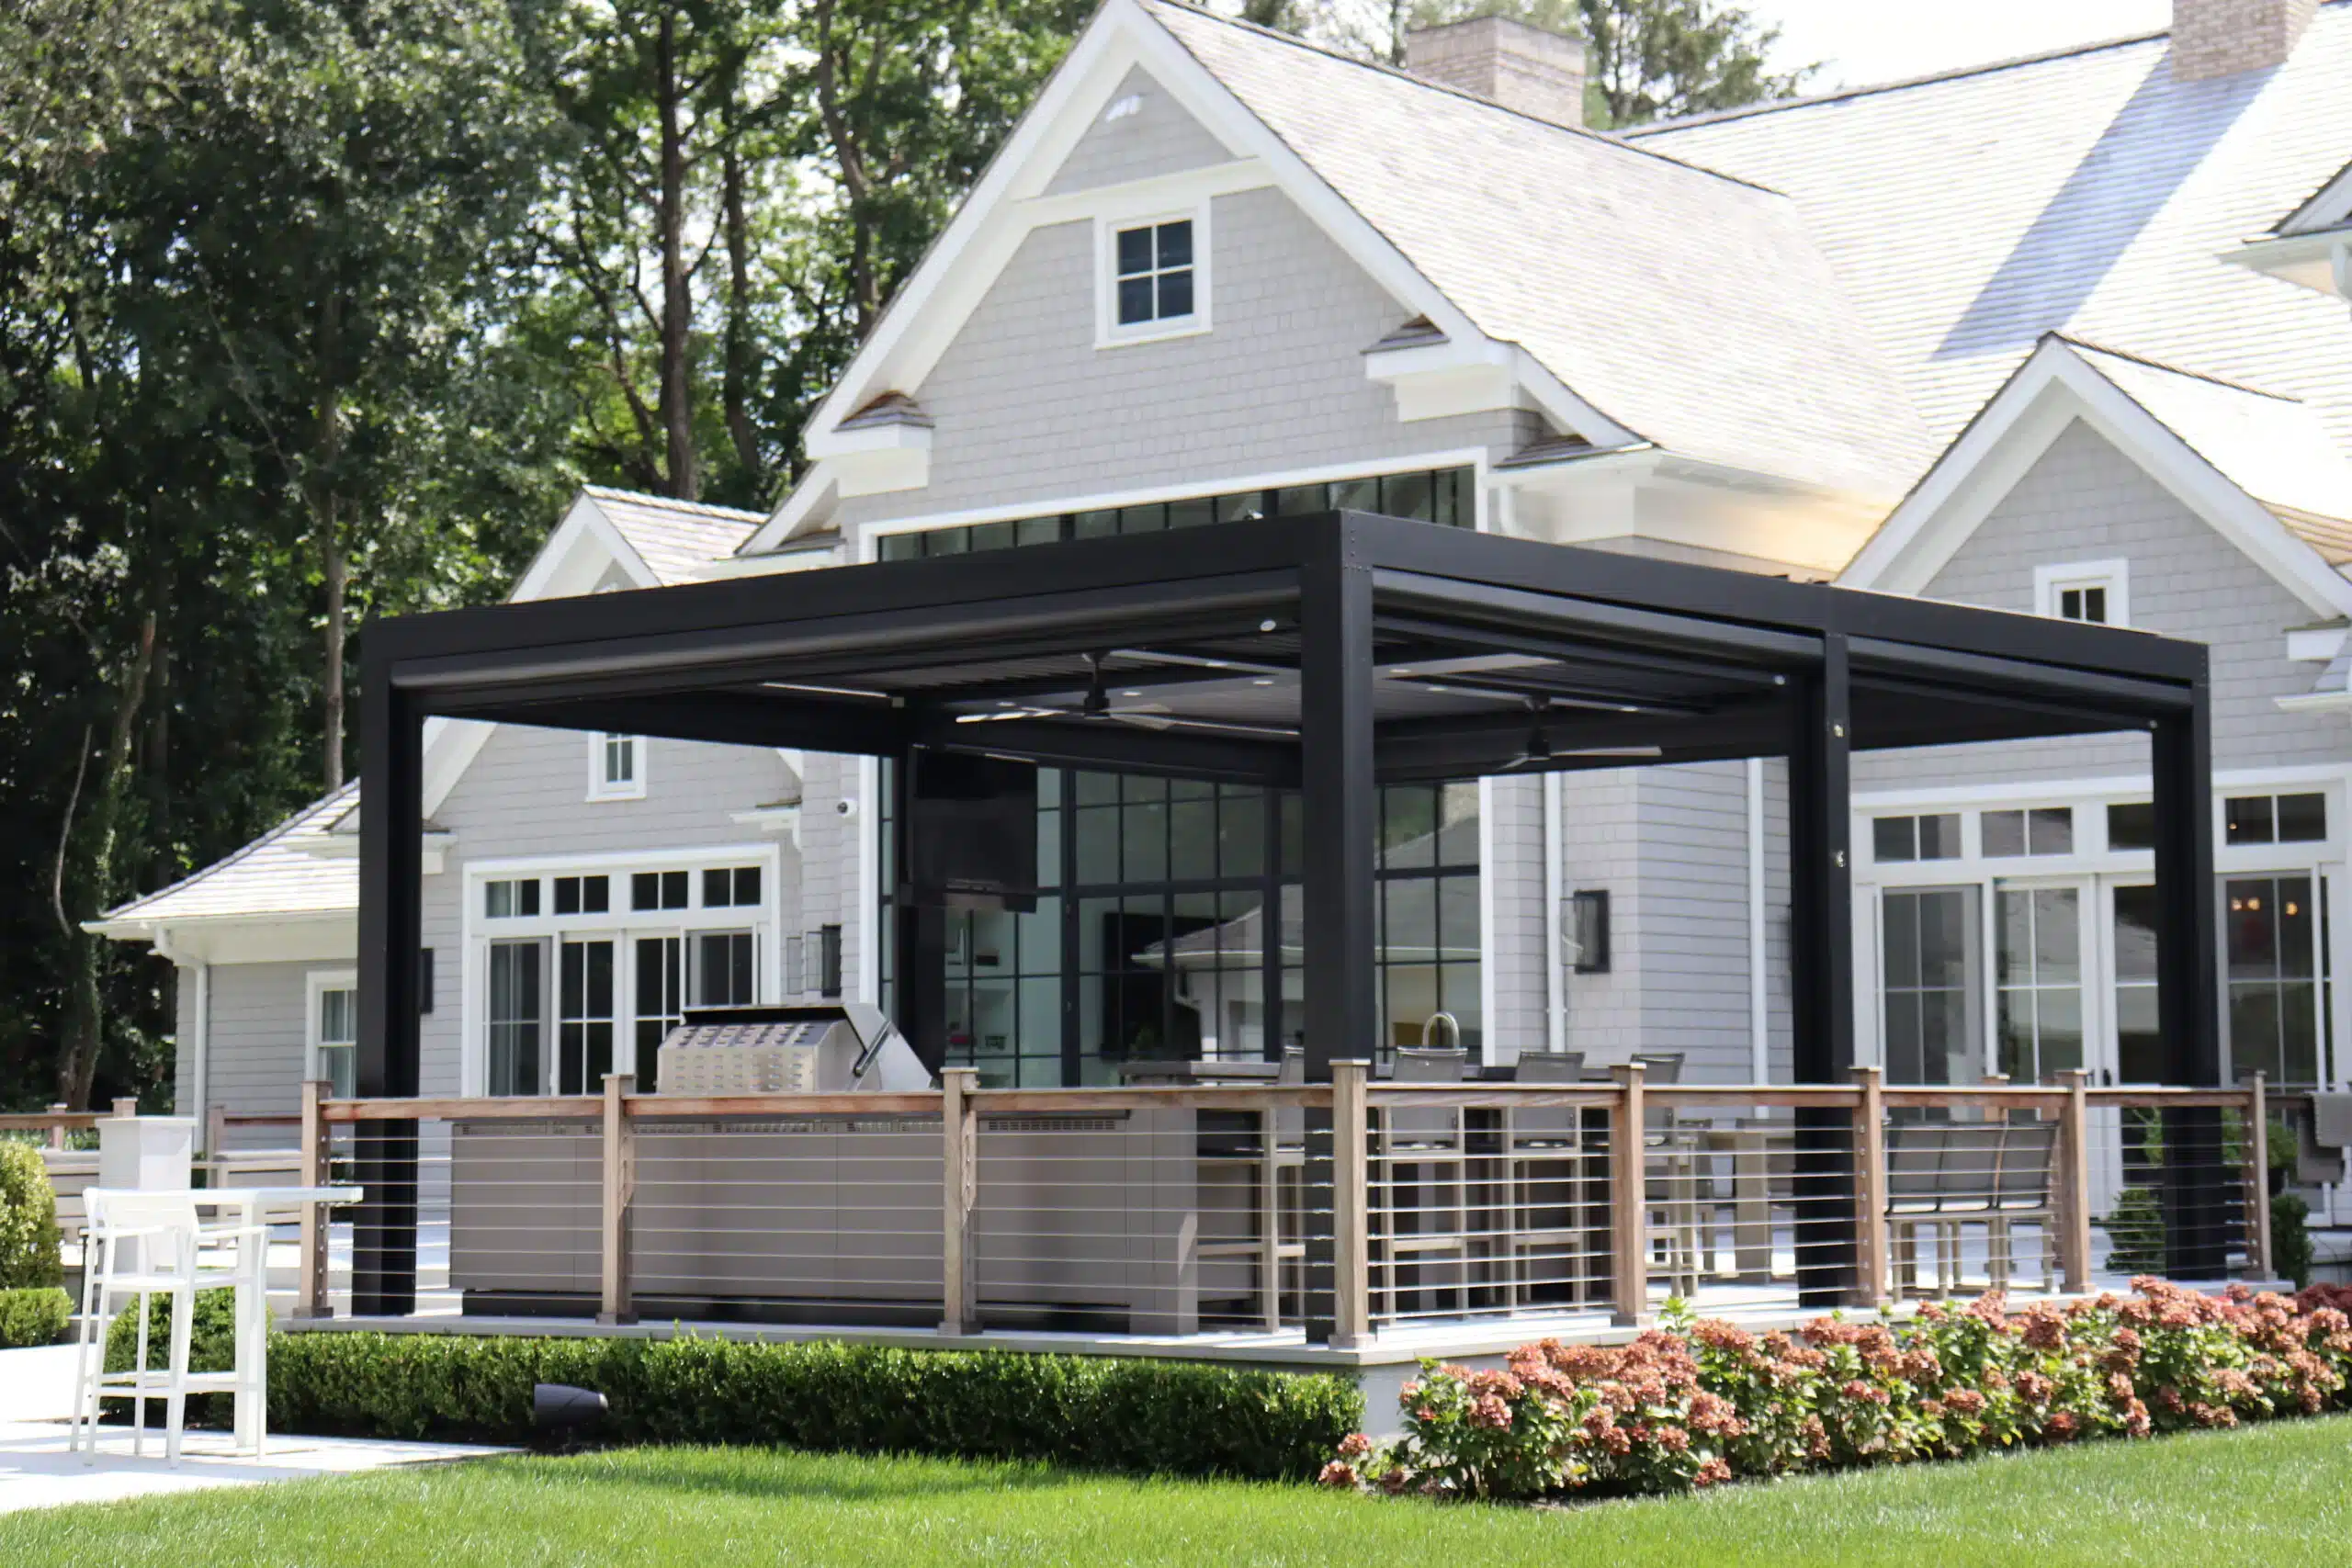 Photo of a StruXure motorized louvered pergola on a patio with an outdoor kitchen and dining area